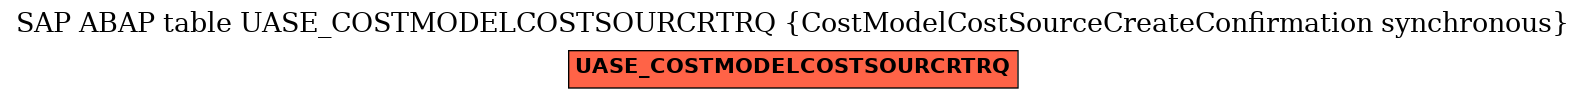 E-R Diagram for table UASE_COSTMODELCOSTSOURCRTRQ (CostModelCostSourceCreateConfirmation synchronous)